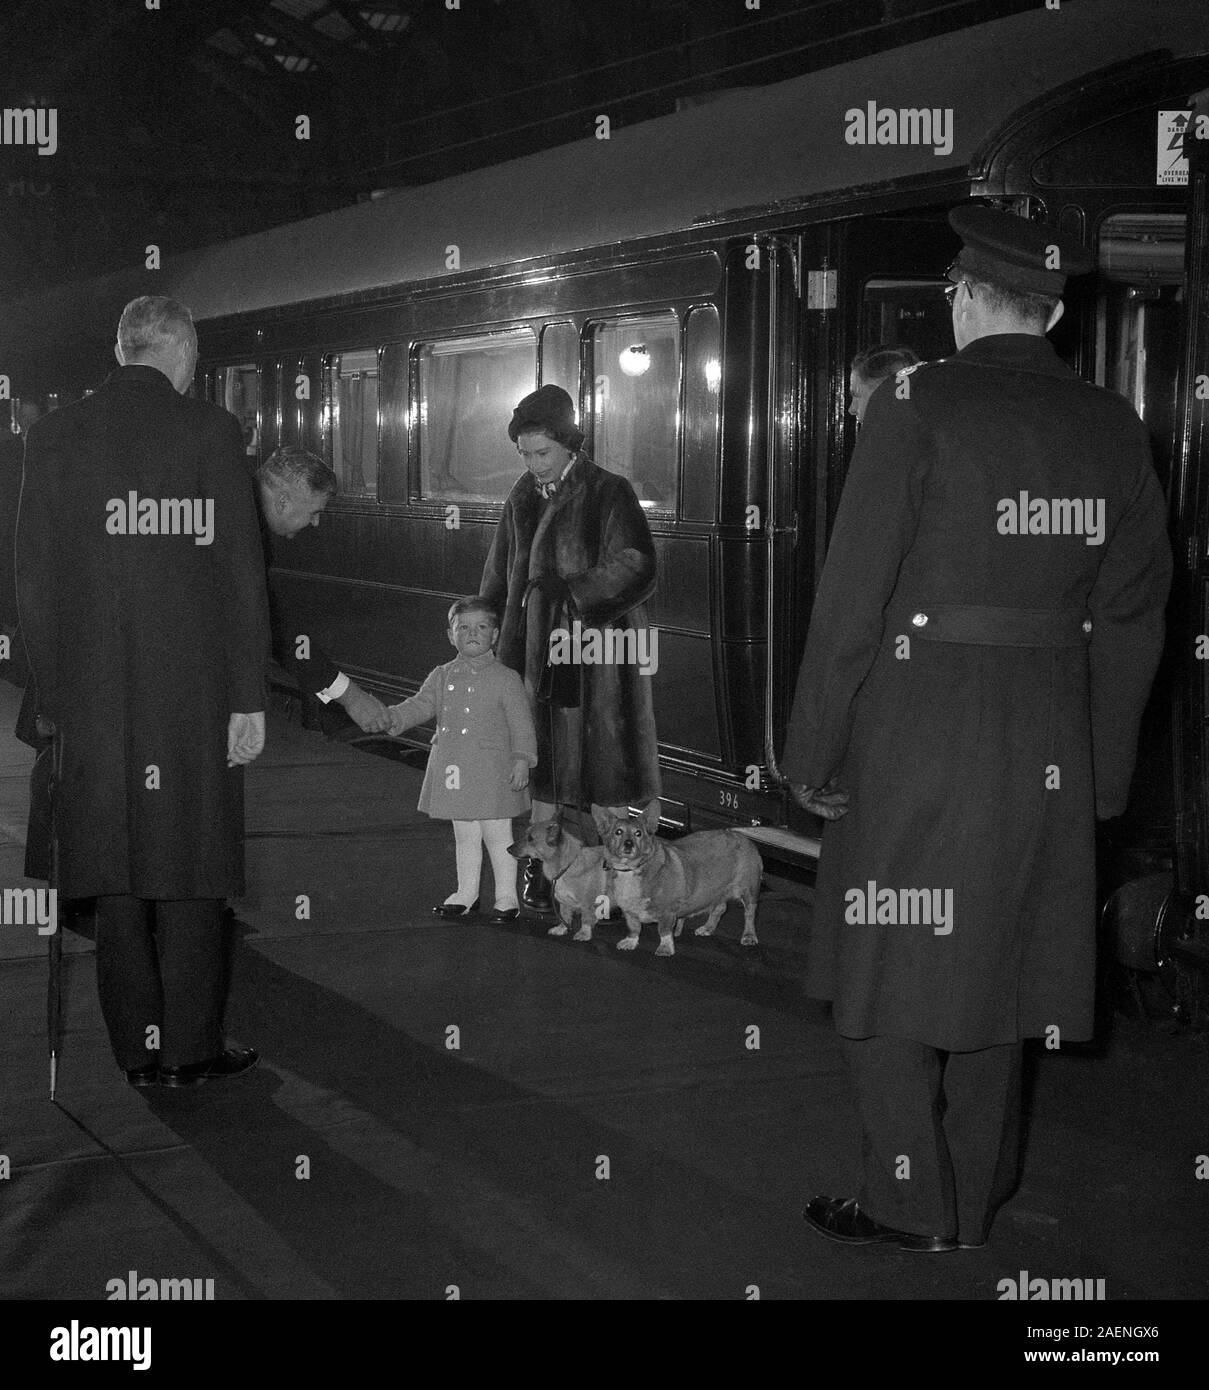 As Queen Elizabeth II takes charge of the two corgis, Prince Andrew shakes hands with the station master at Liverpool Street Station, London. The Queen had just returned to London with the Prince from Sandringham, where they had been for the Christmas holidays. Stock Photo